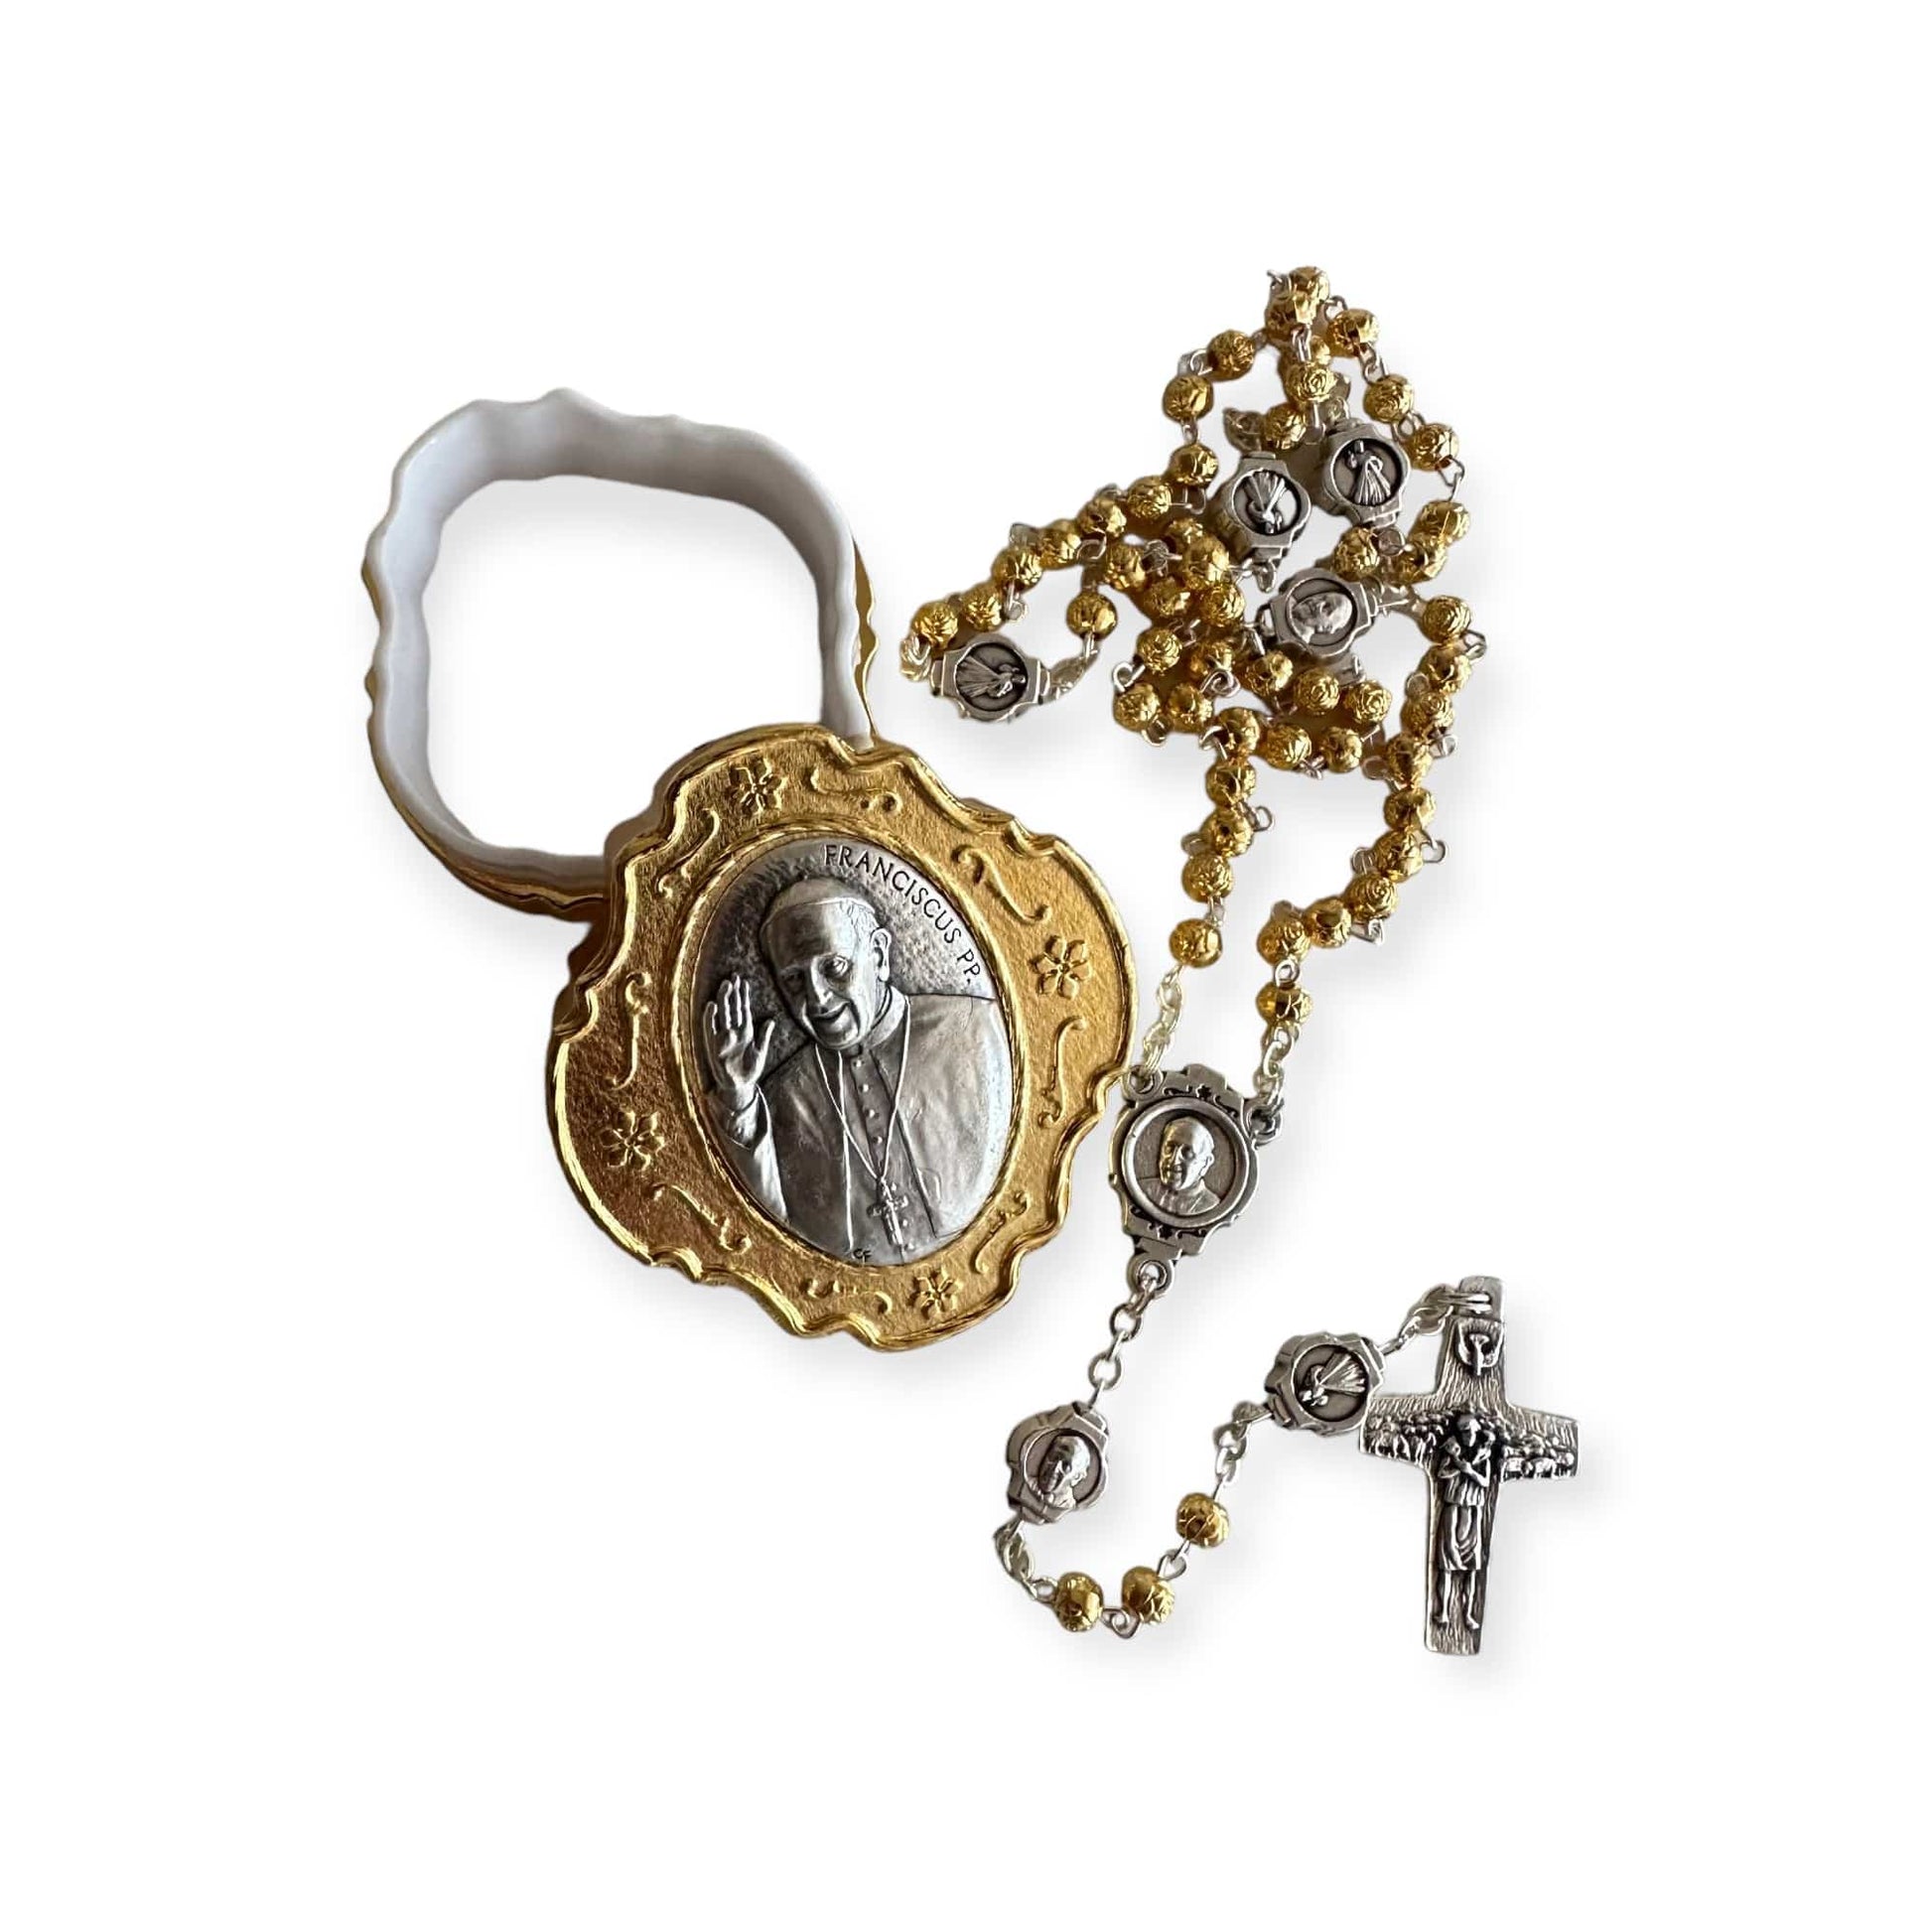 Catholically Rosaries Dedicated To Pope Francis - Tiny Golden Rosary w/ Case - Blessed By Pope